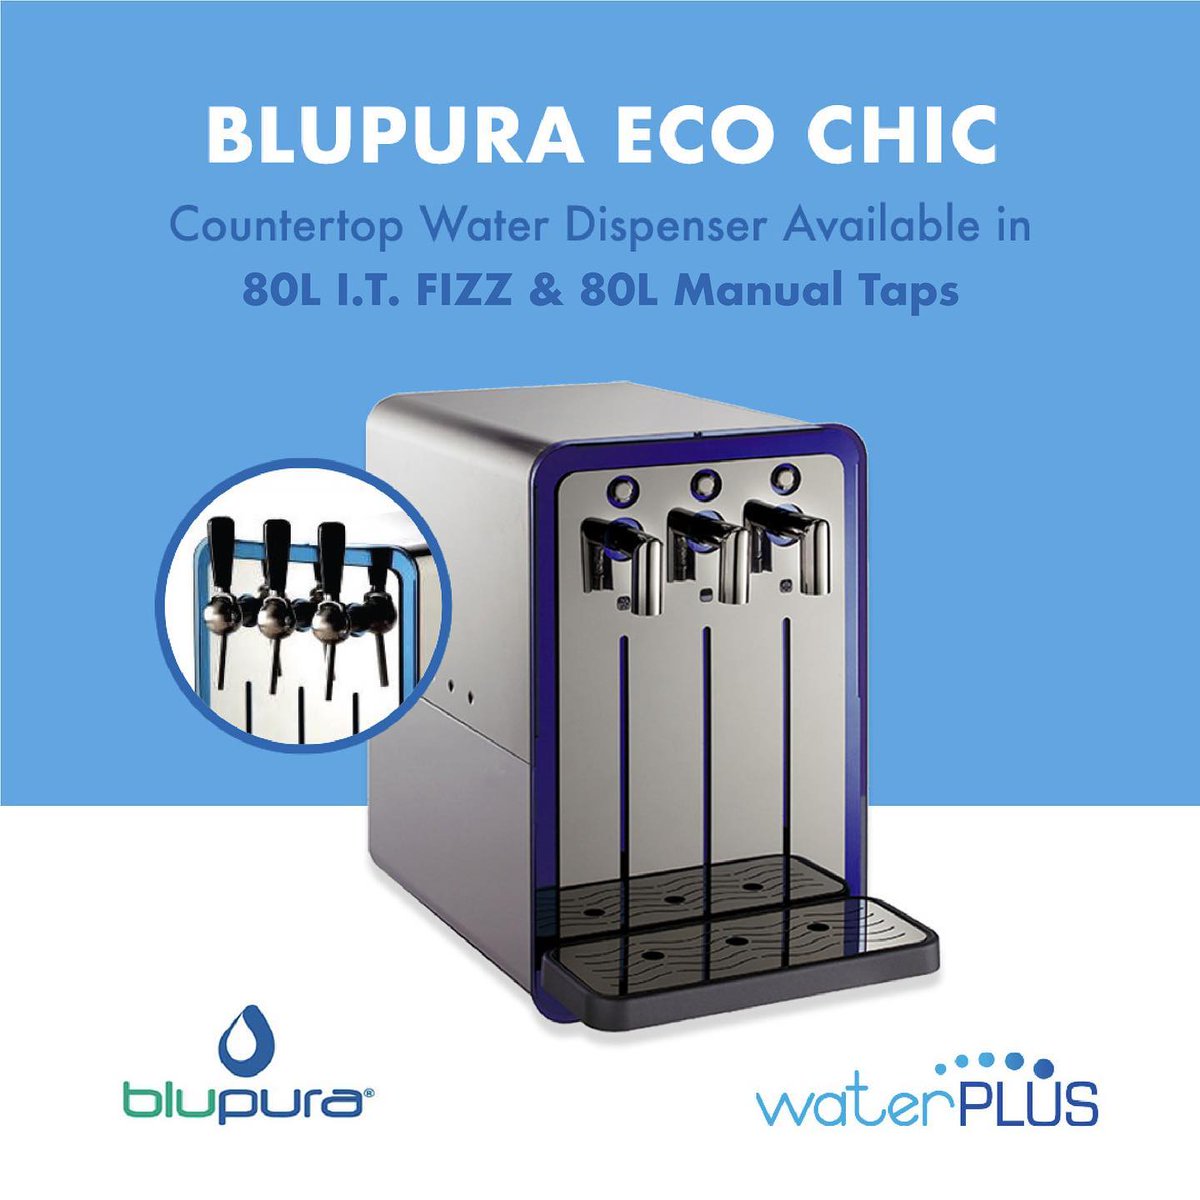 BevPLUS water dispenser!

Looking for a water dispensing solution for your office or restaurant?📷

#BluPura #waterdispenser #filteredwater #ecofriendlydispenser #water #dispenser #watermachines #cleanwater #waterpurification #waterdispensing #productfeature #LessPlasticIsCool